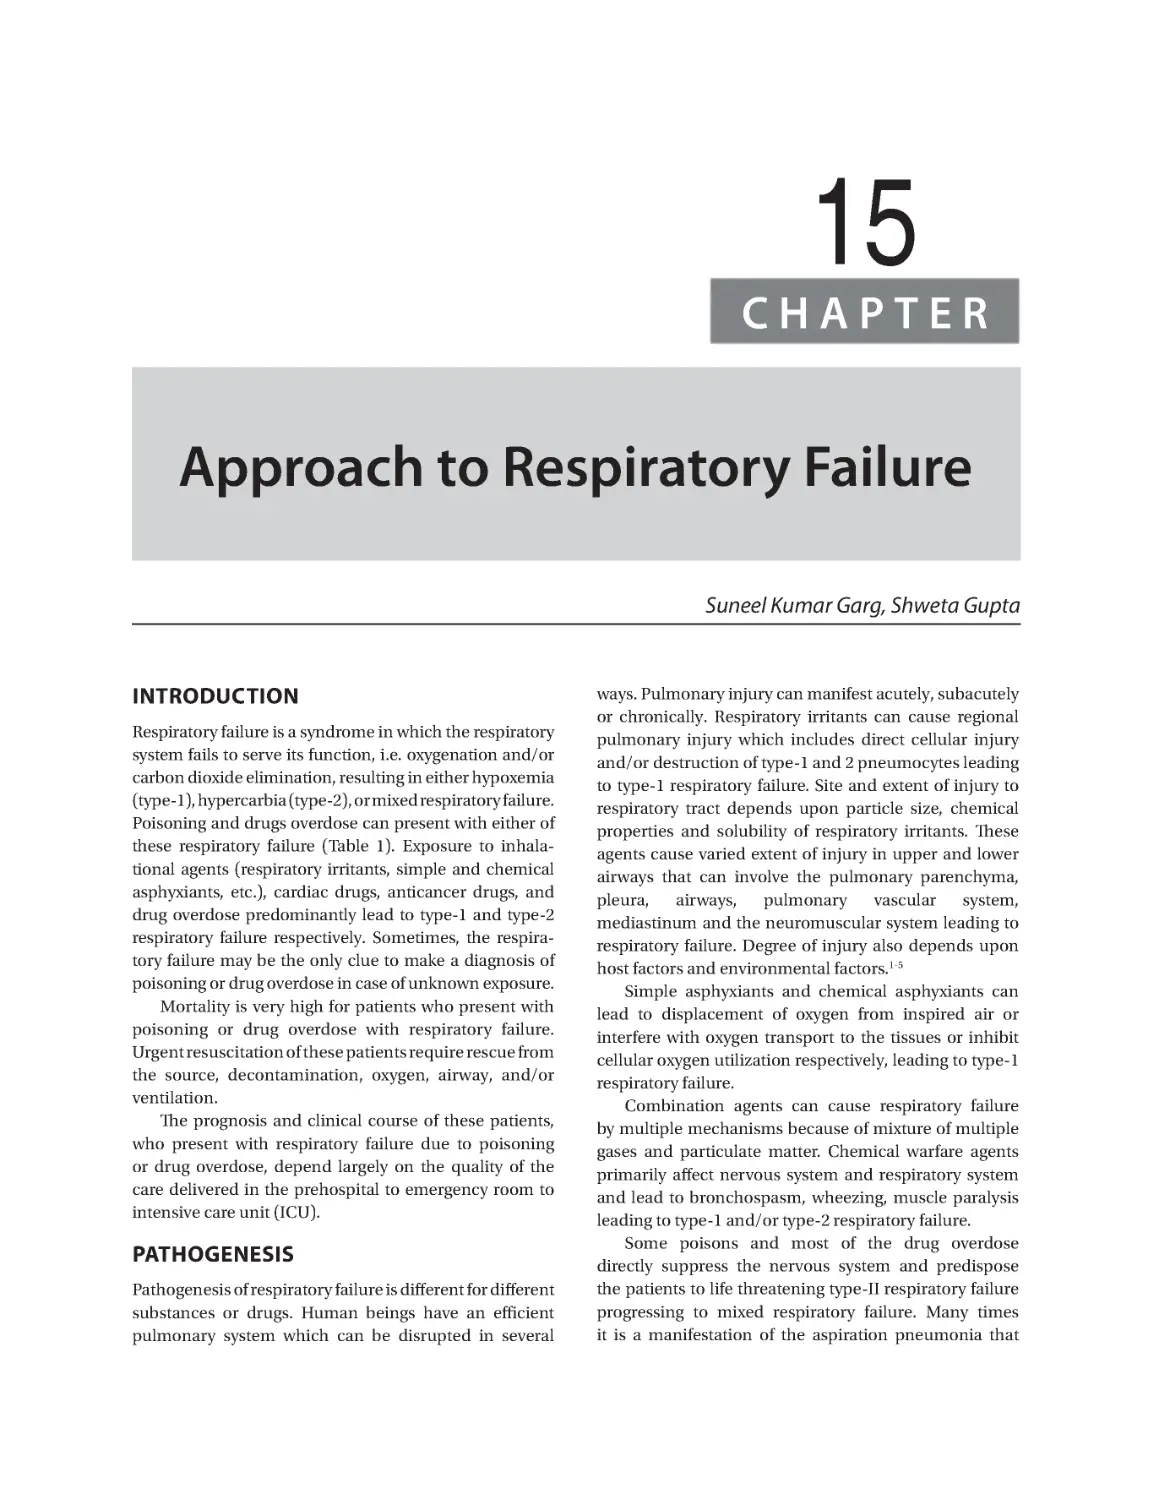 Chapter 15: Approach to Respiratory Failure